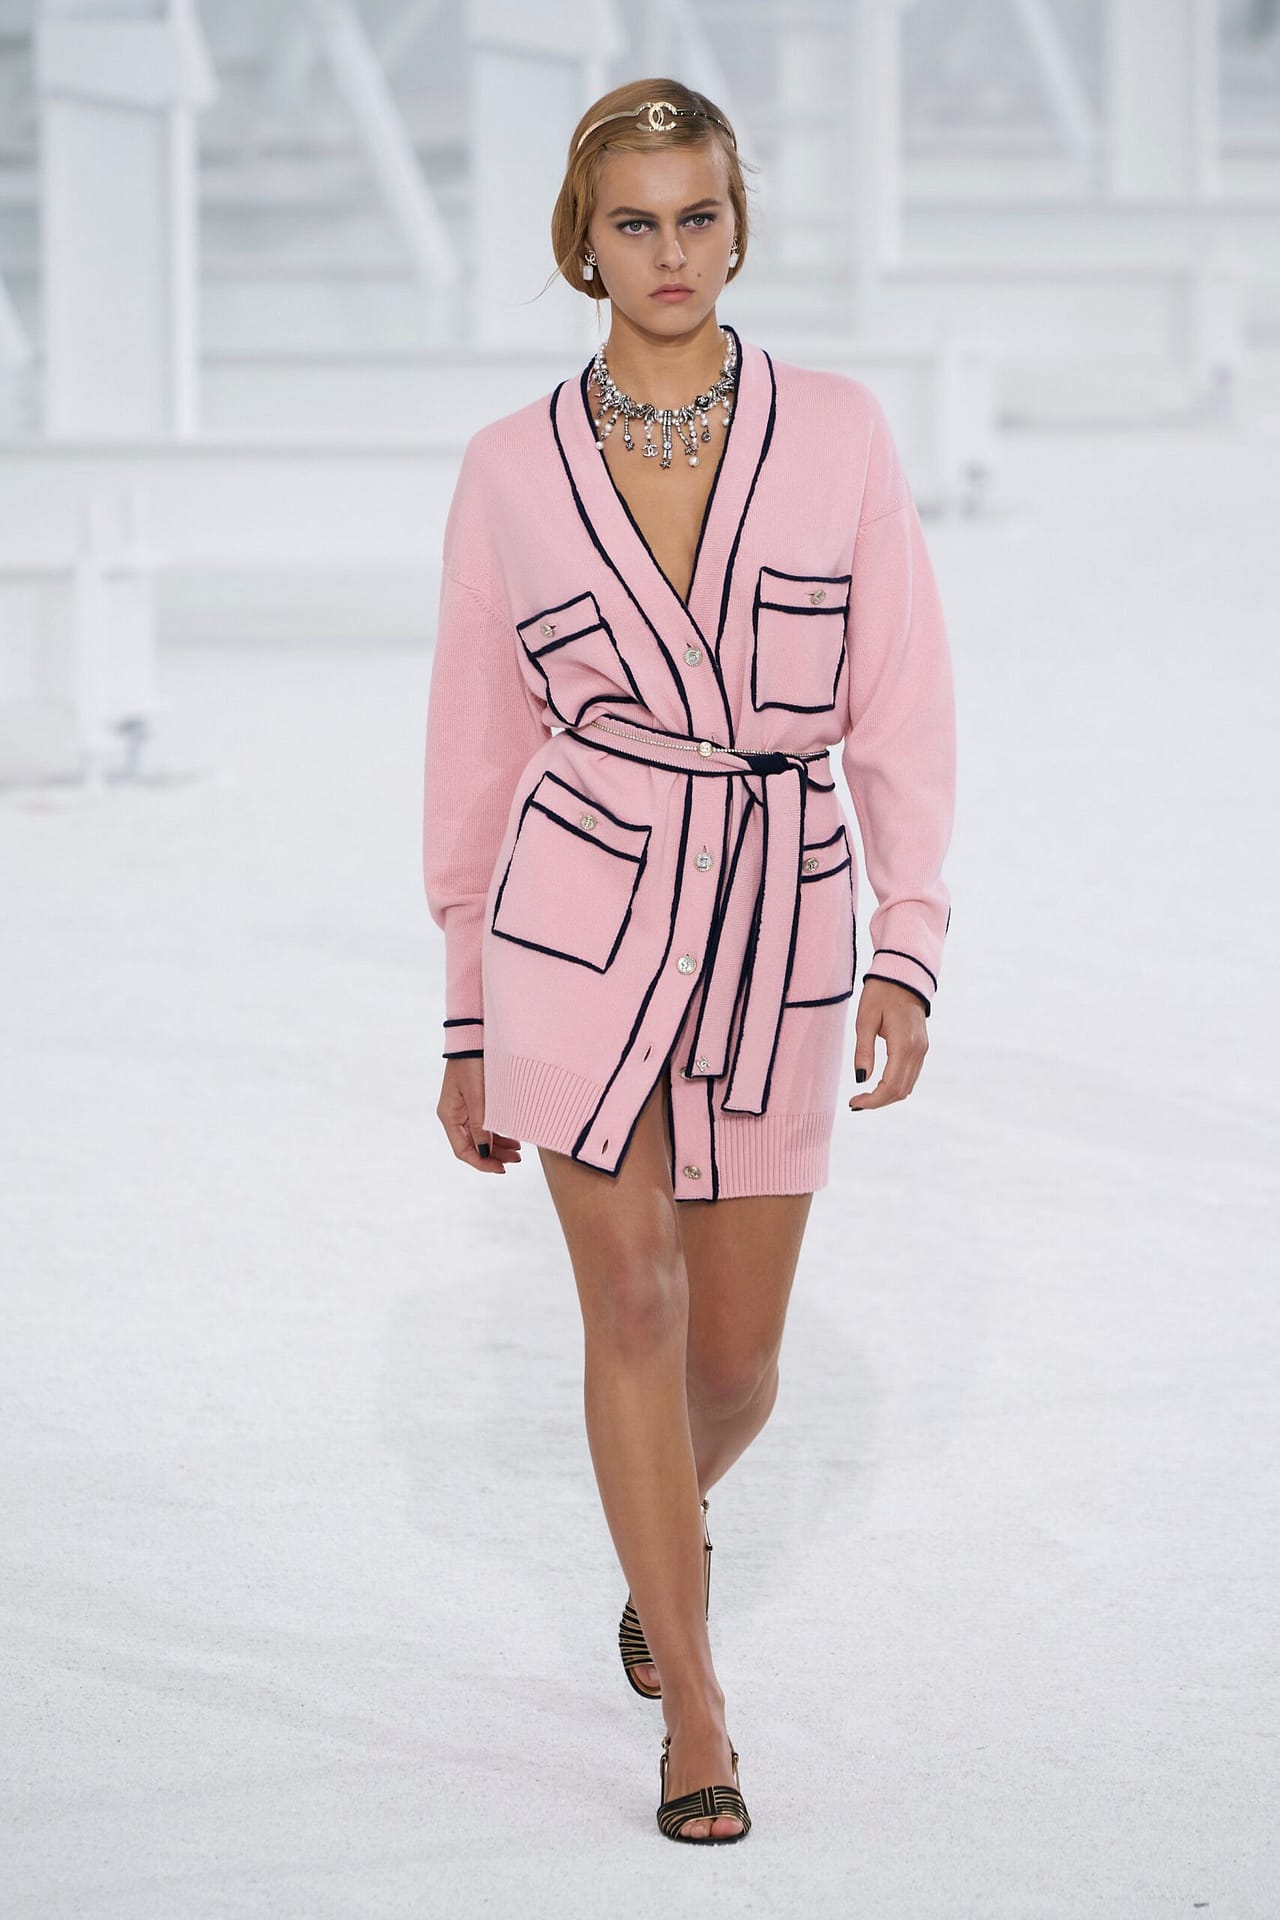 Chanel Ready-to-Wear Spring 2020